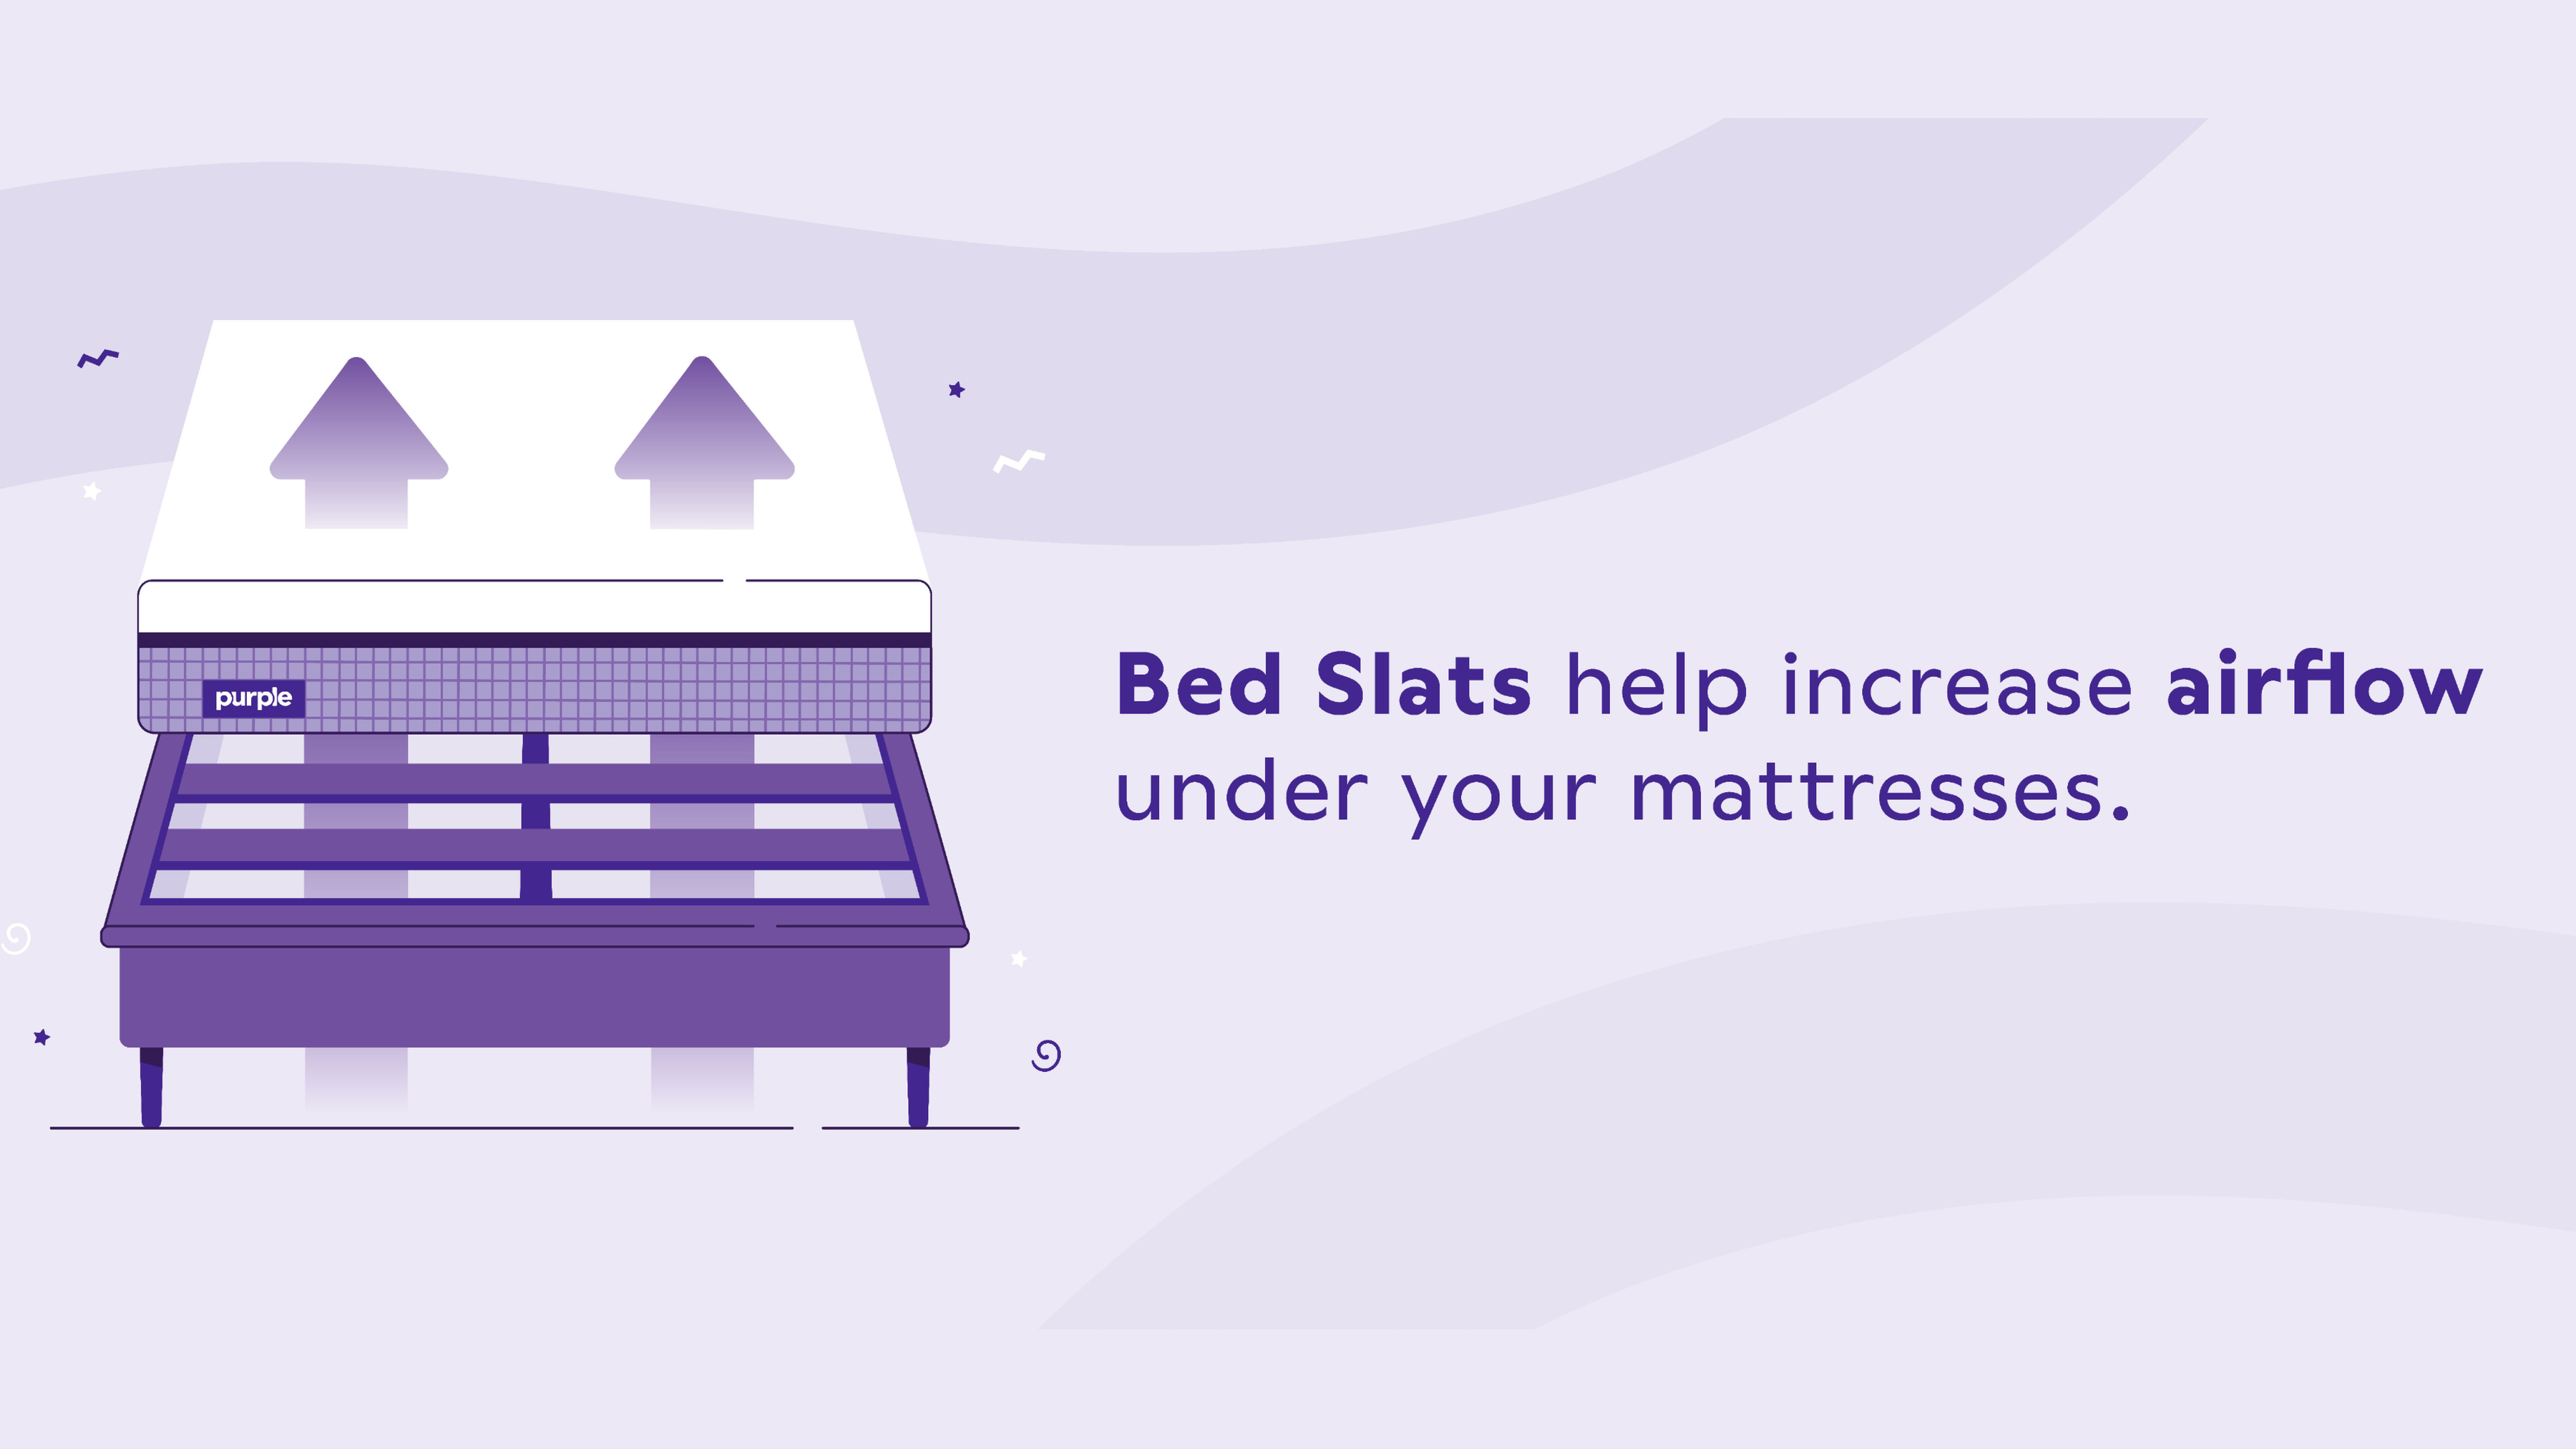 bed slats are ideal for